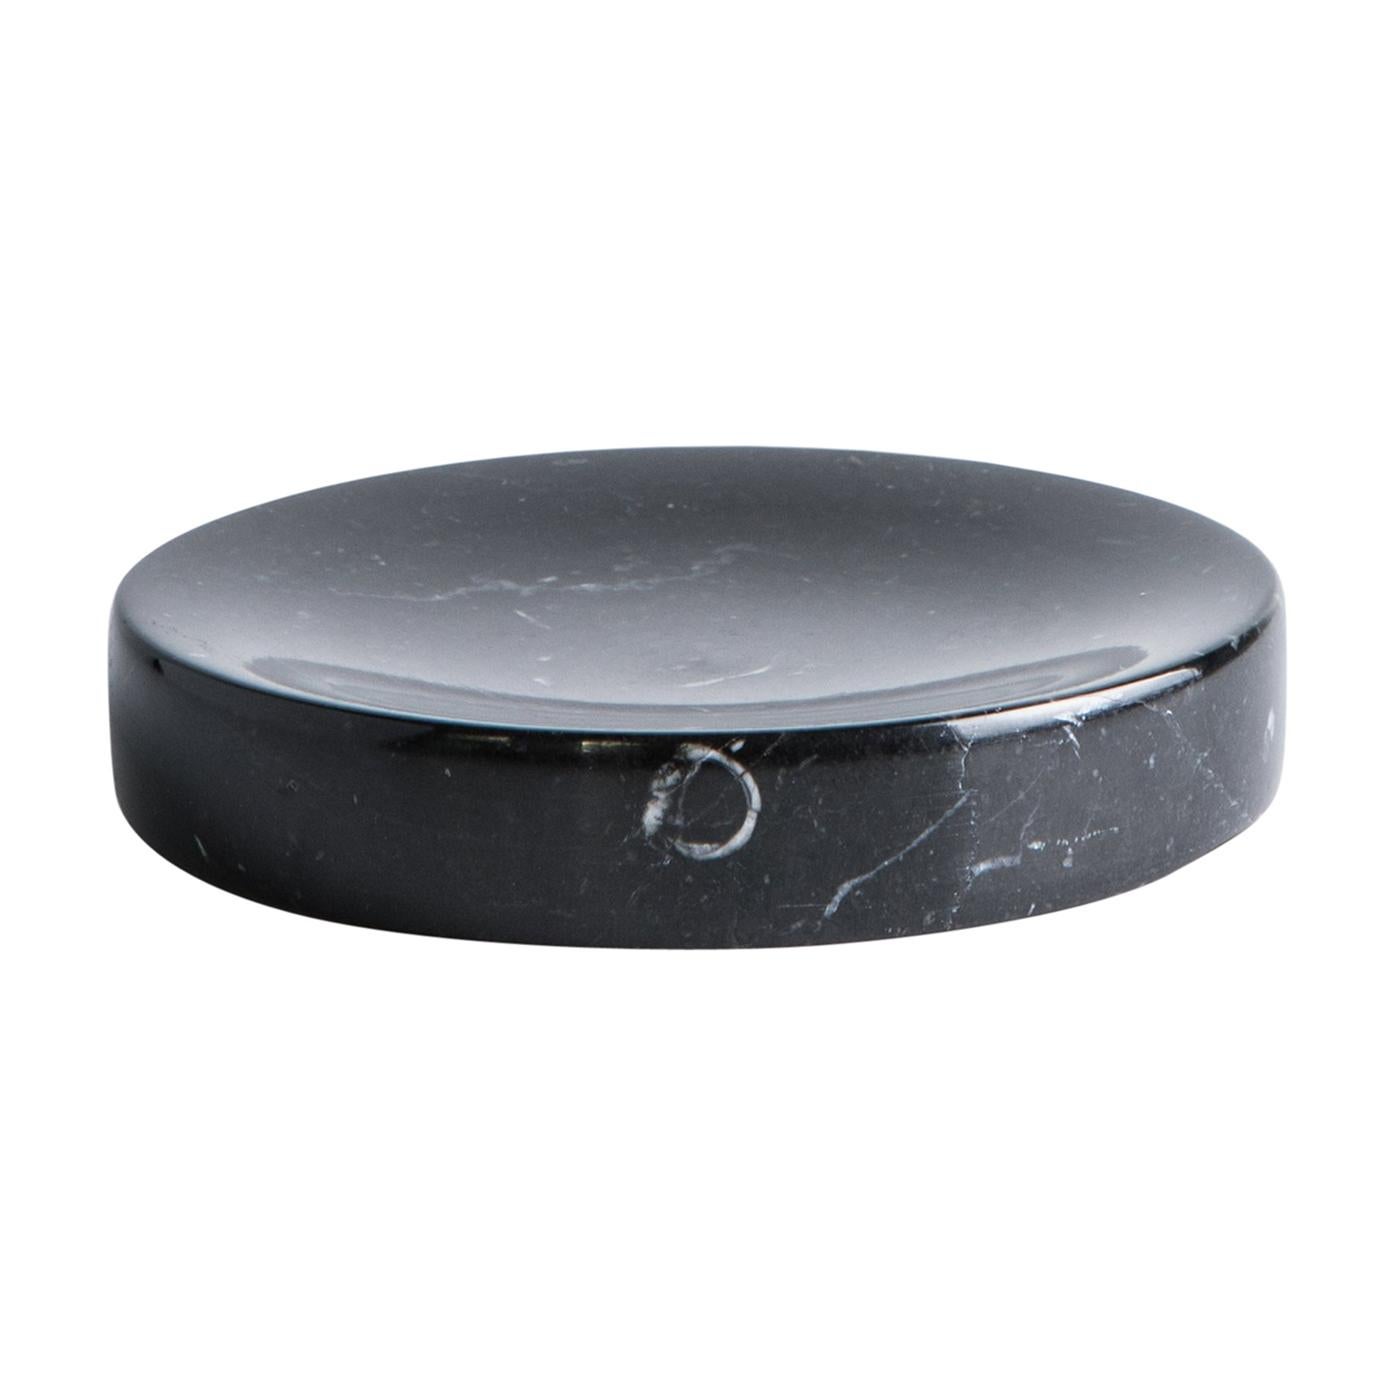 Handmade Rounded Soap Dish in Black Marquina Marble